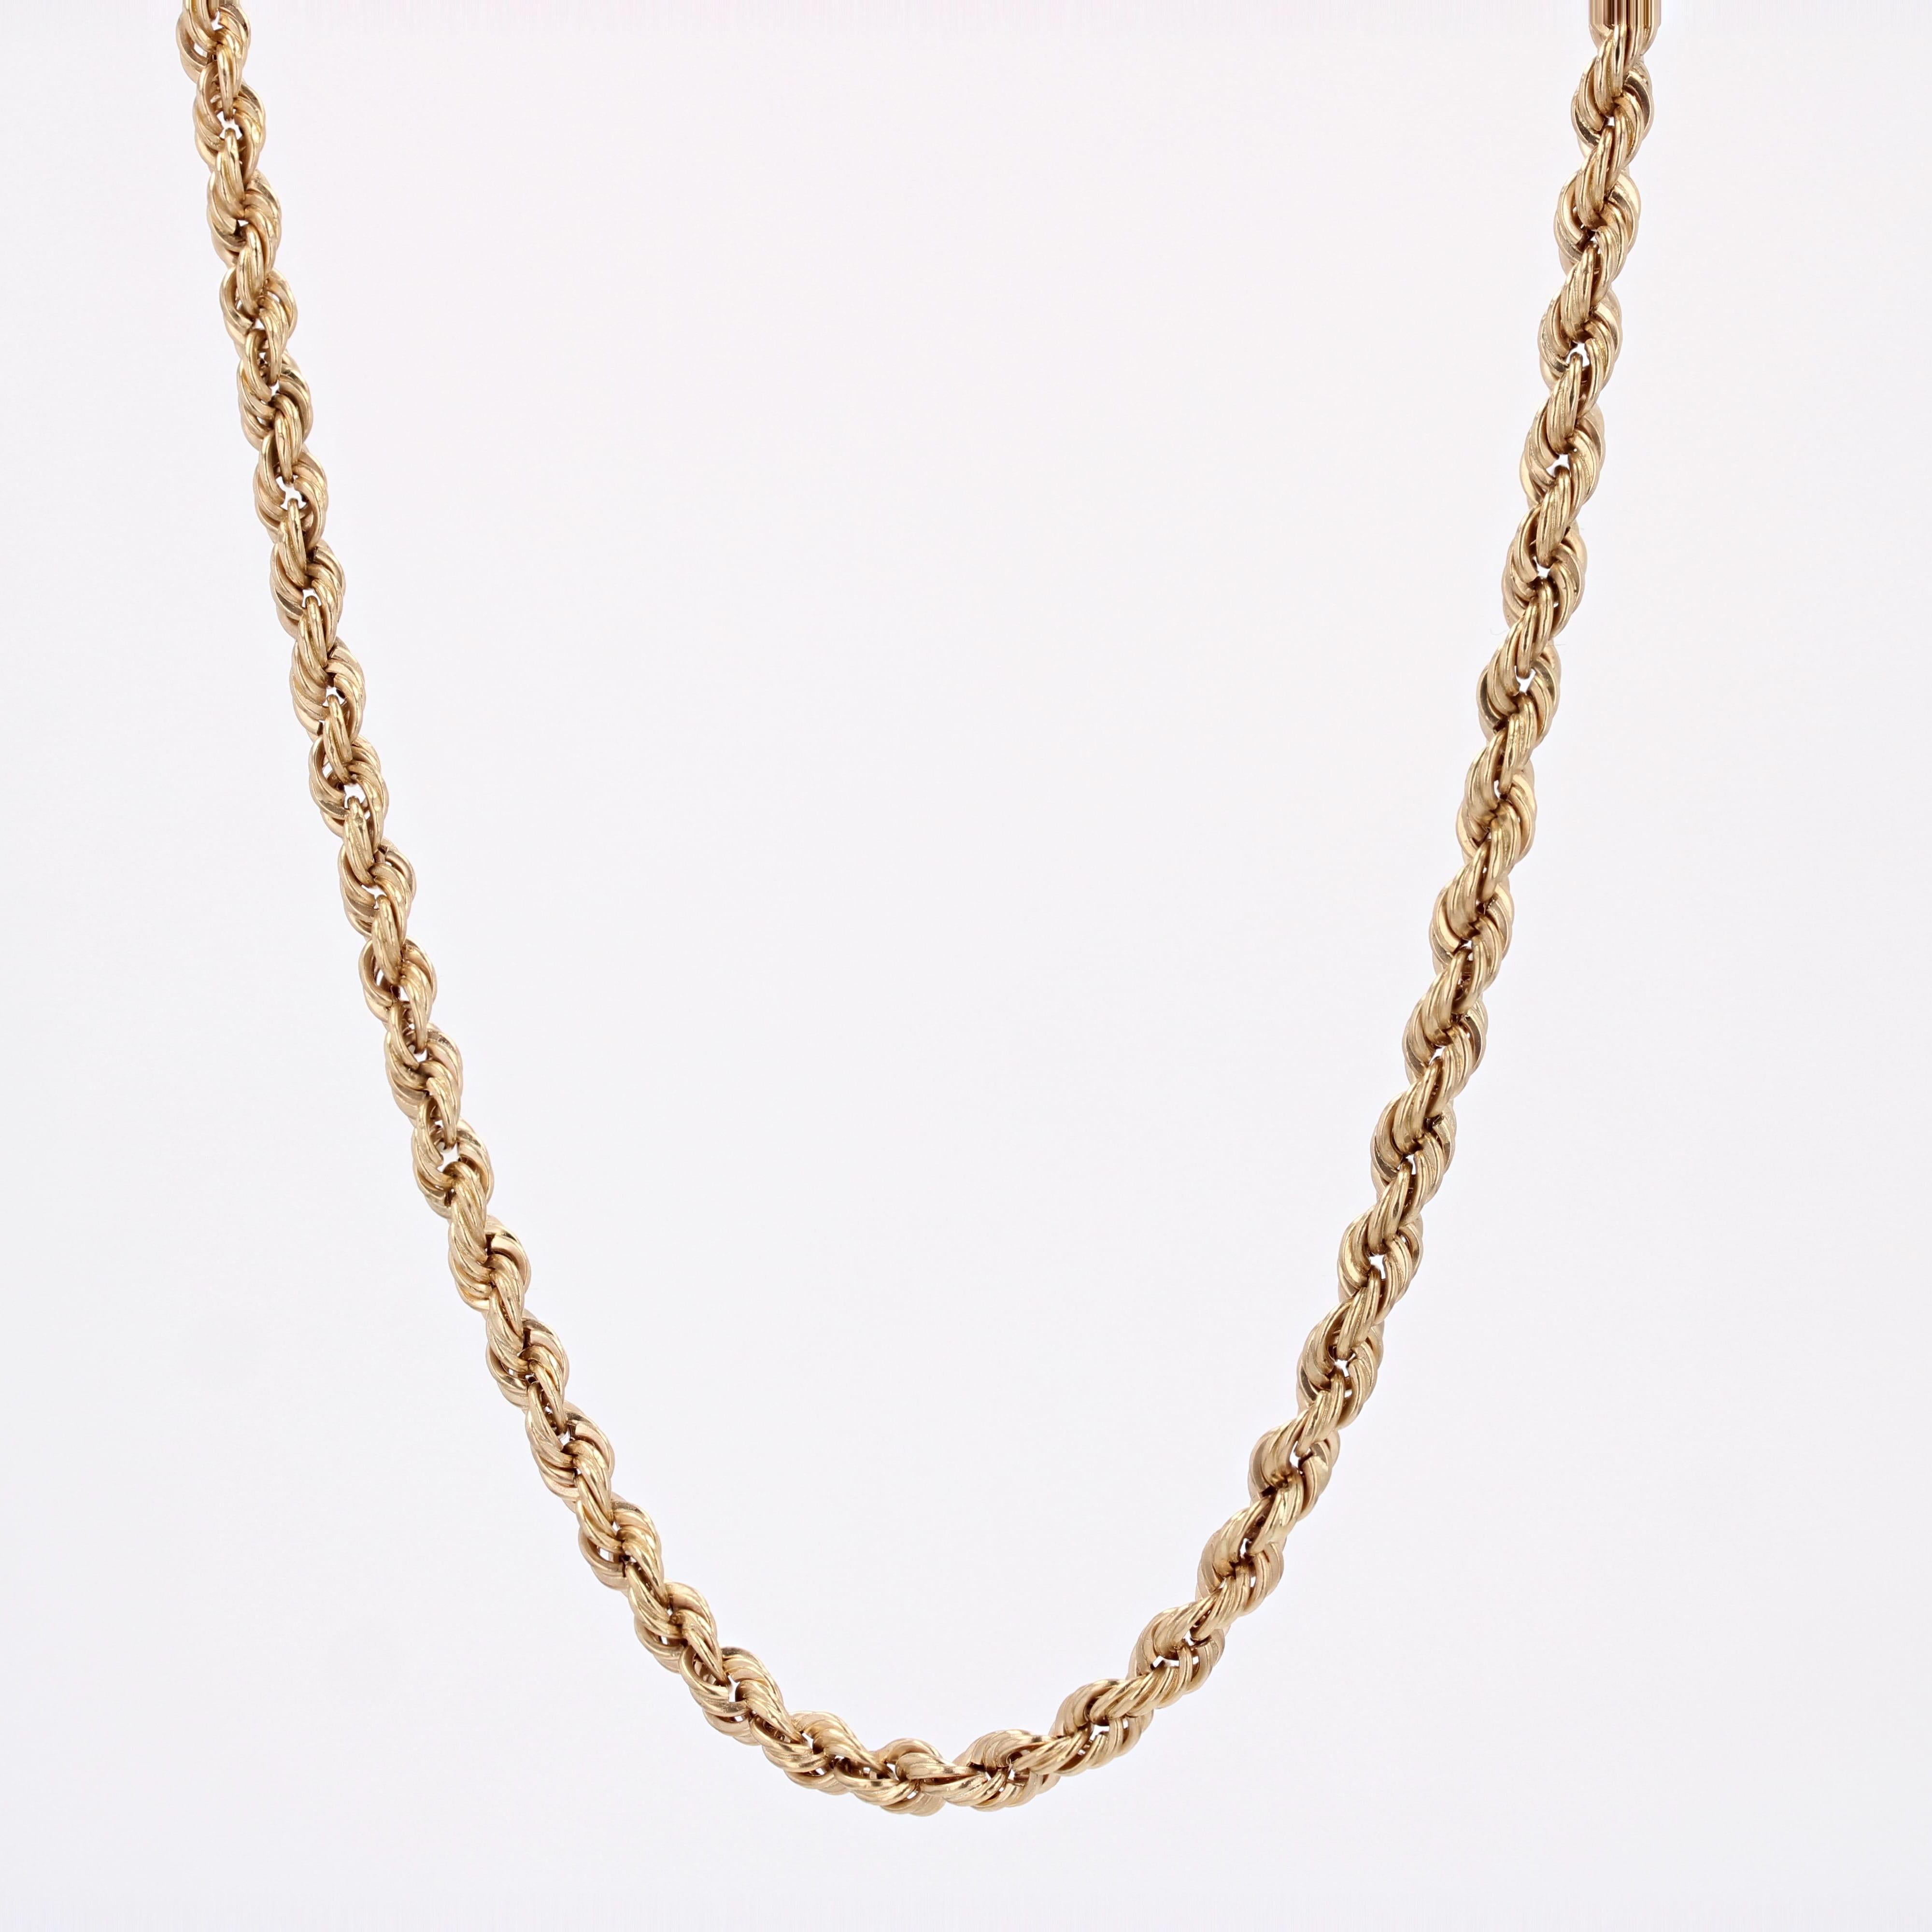 1960s 18 Karat Yellow Gold Retro Twisted Chain Long Necklace For Sale 2